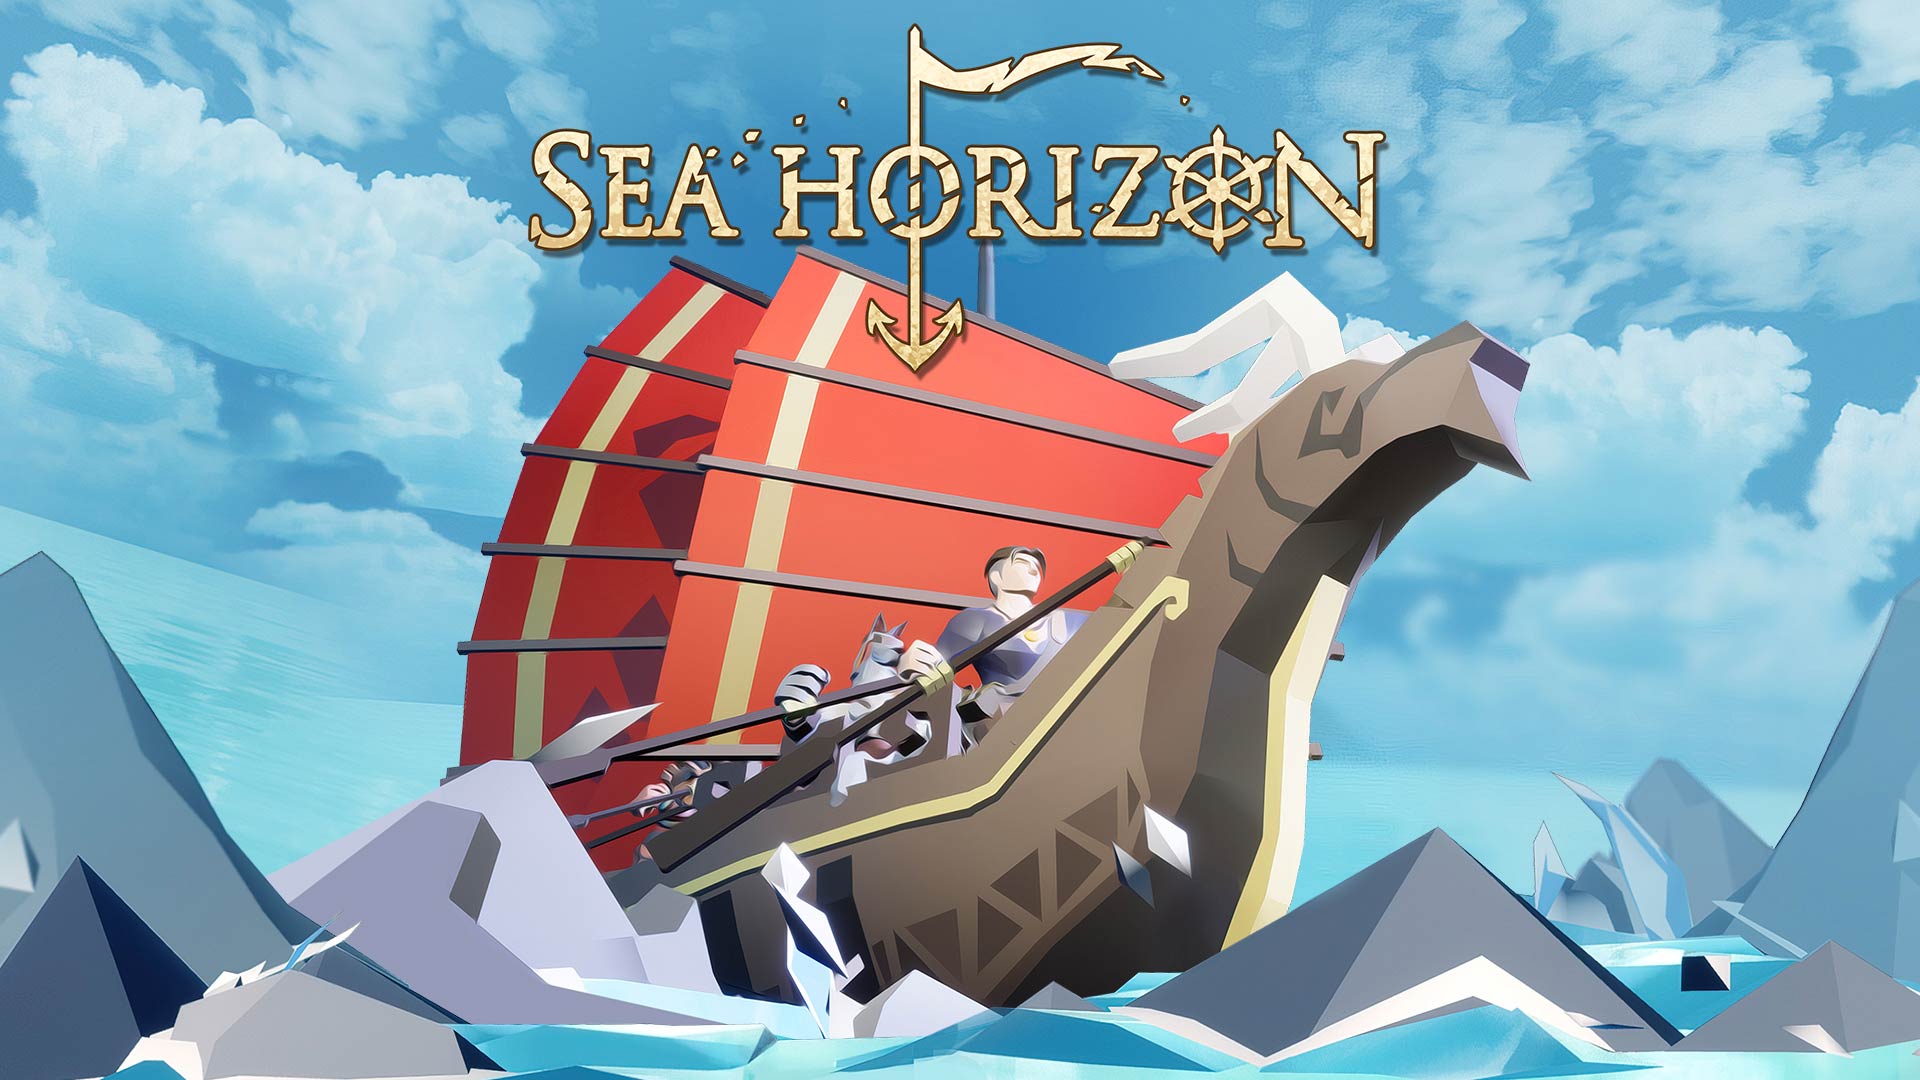 Sea Horizon characters introduced in new trailer